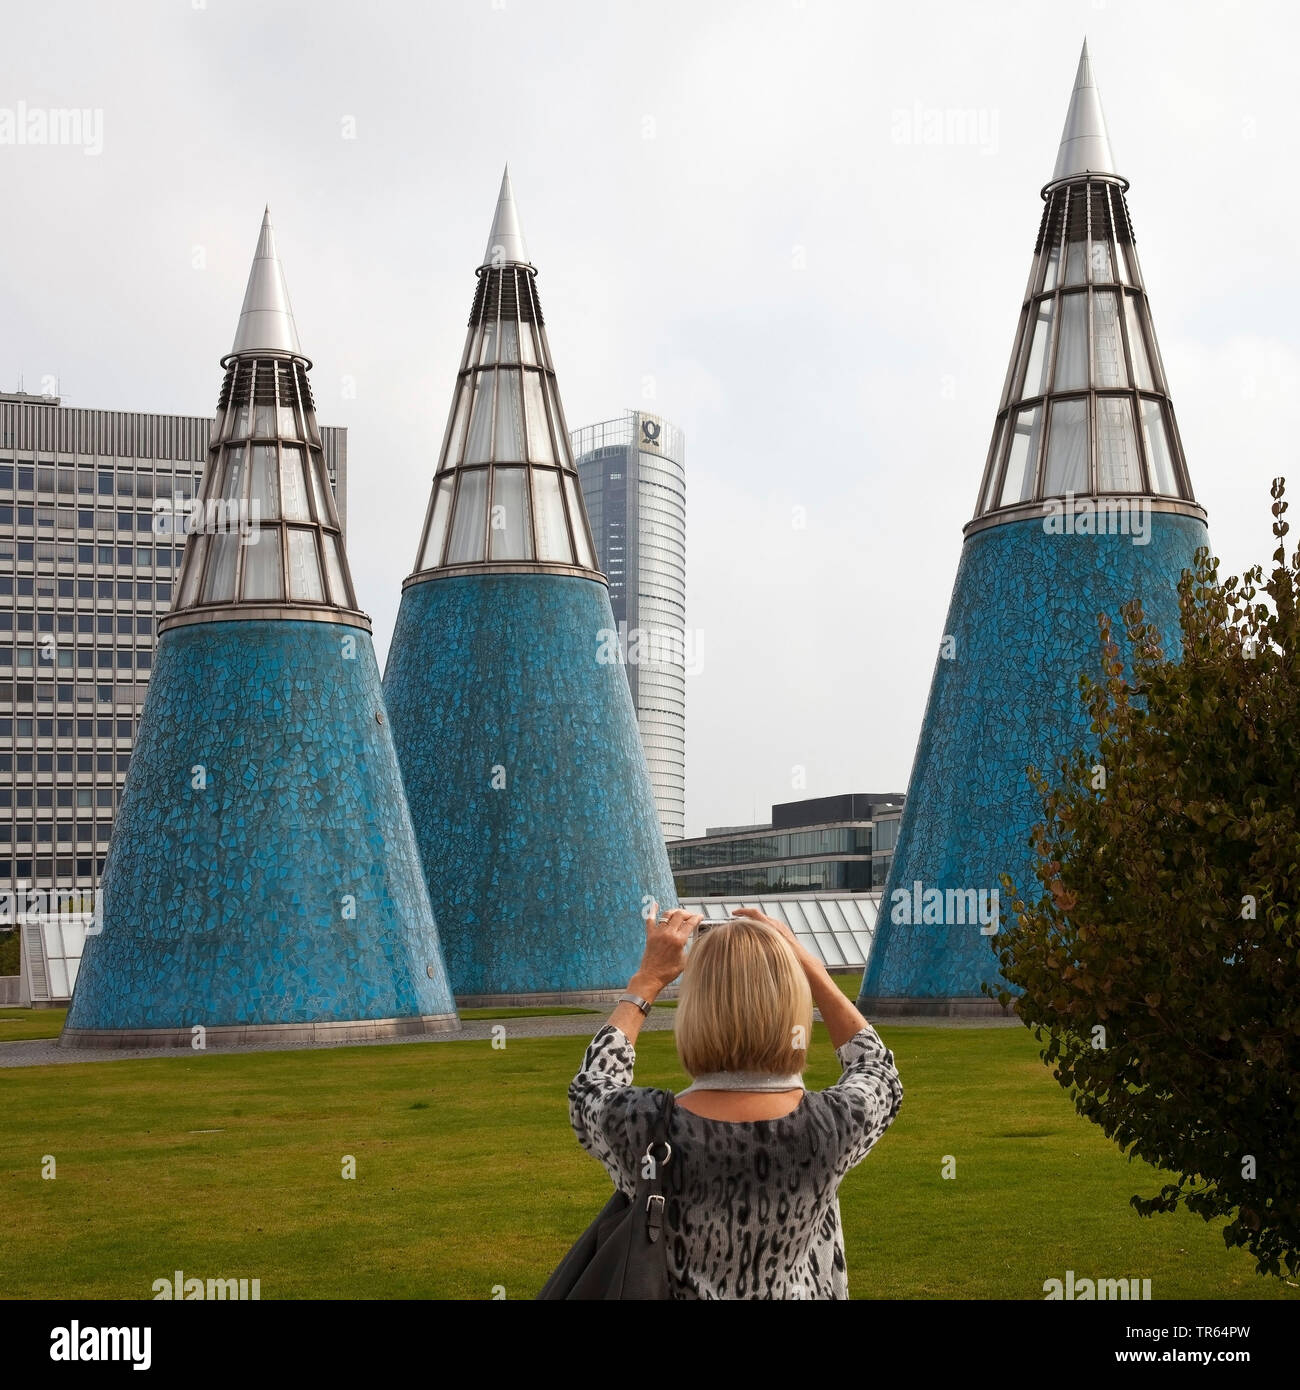 woman taking pictures of the conical light wells on the roof garden of the Art and Exhibition Hall, Germany, North Rhine-Westphalia, Bonn Stock Photo